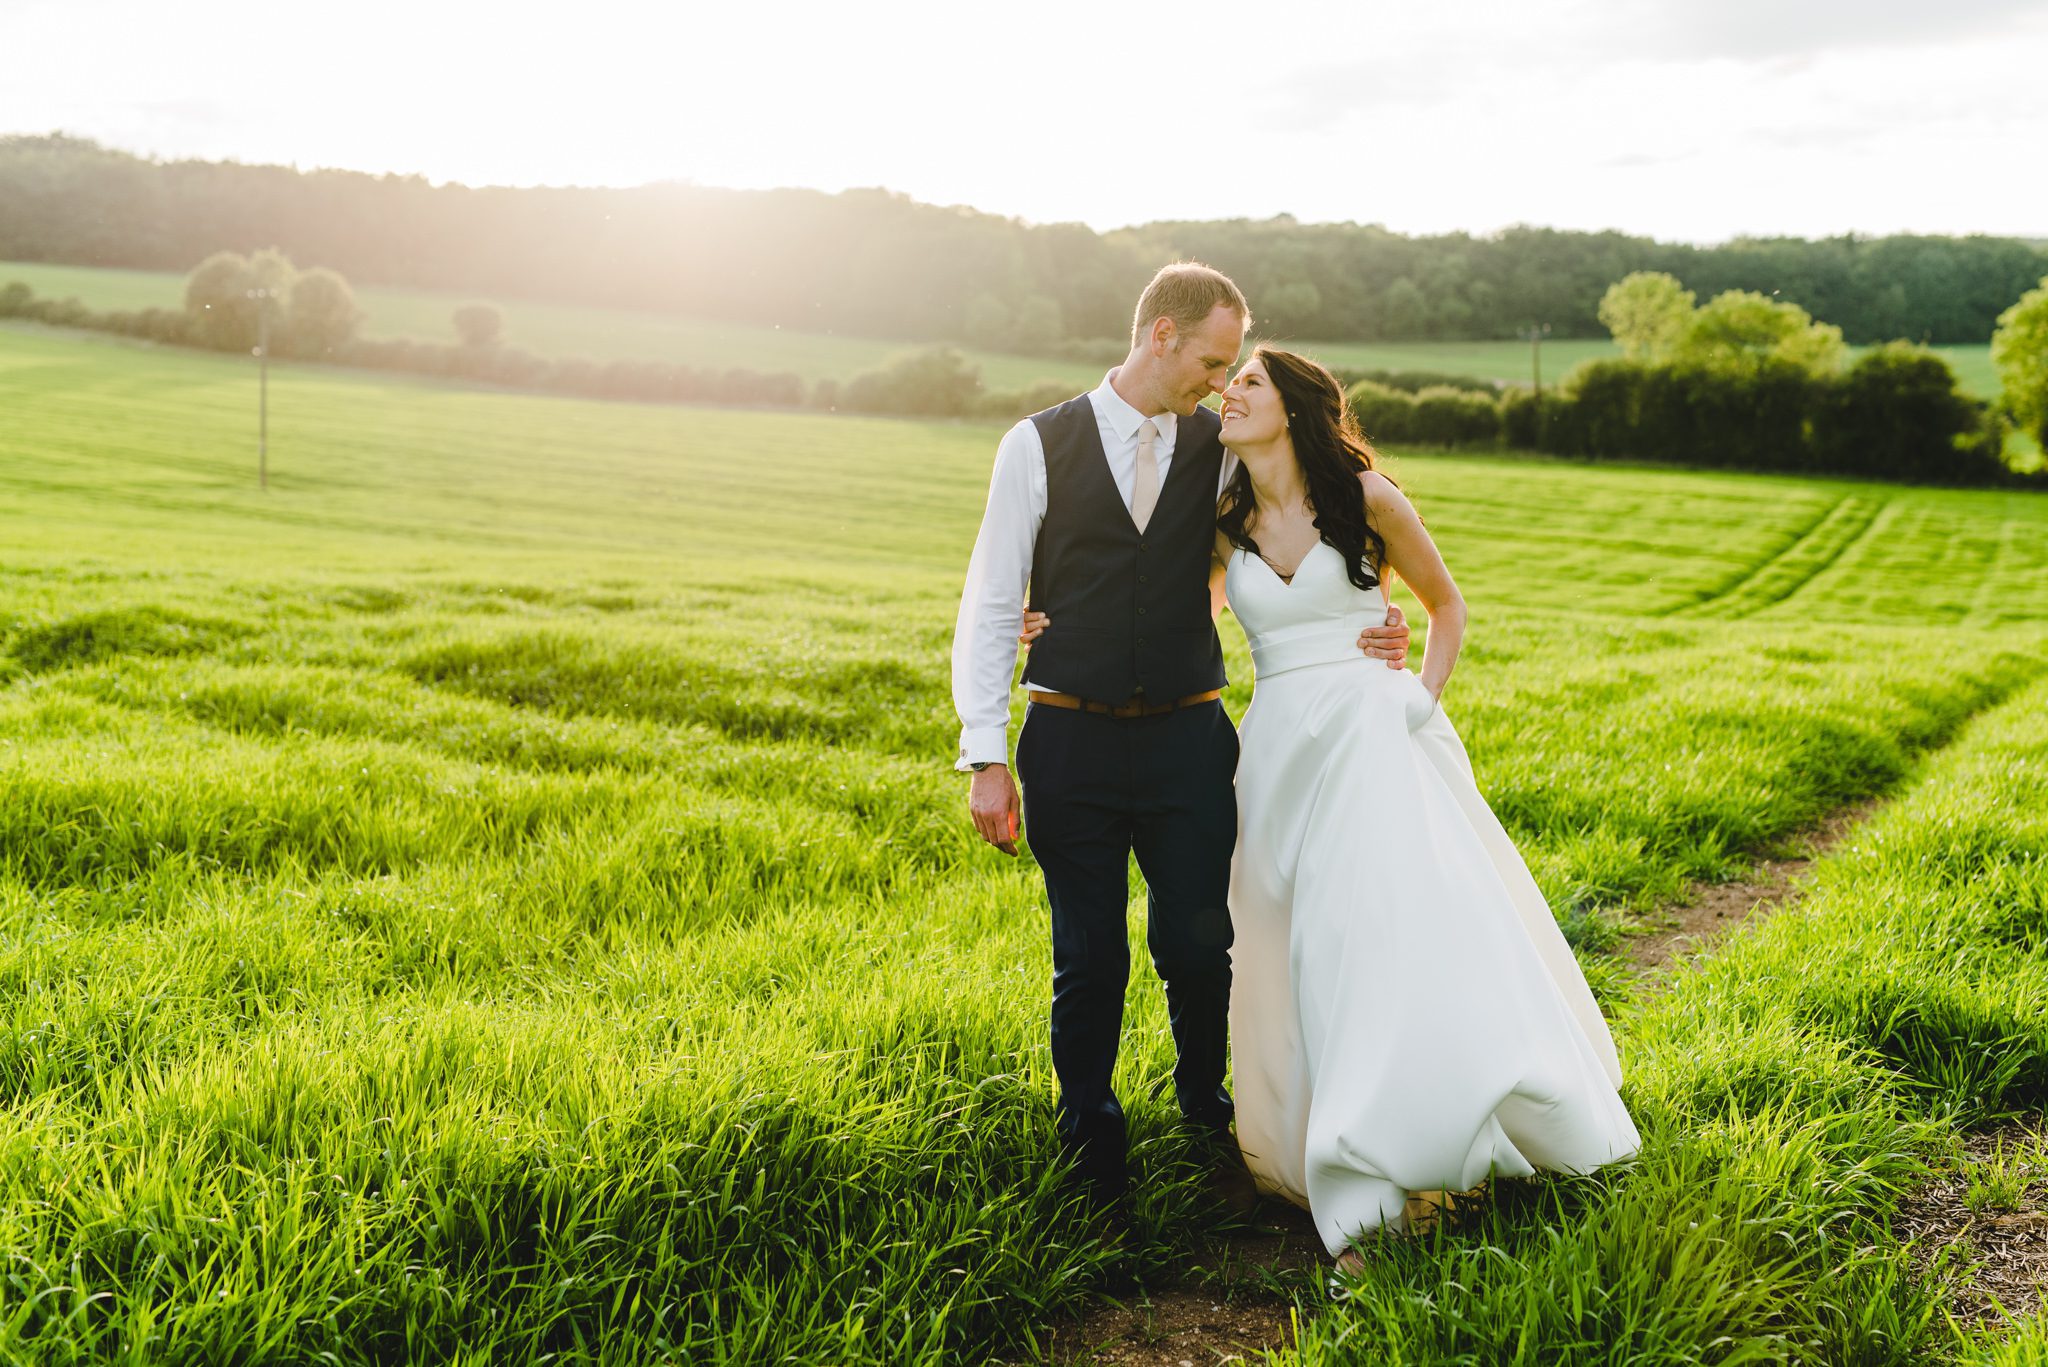 A couple at their upcote barn wedding in a field